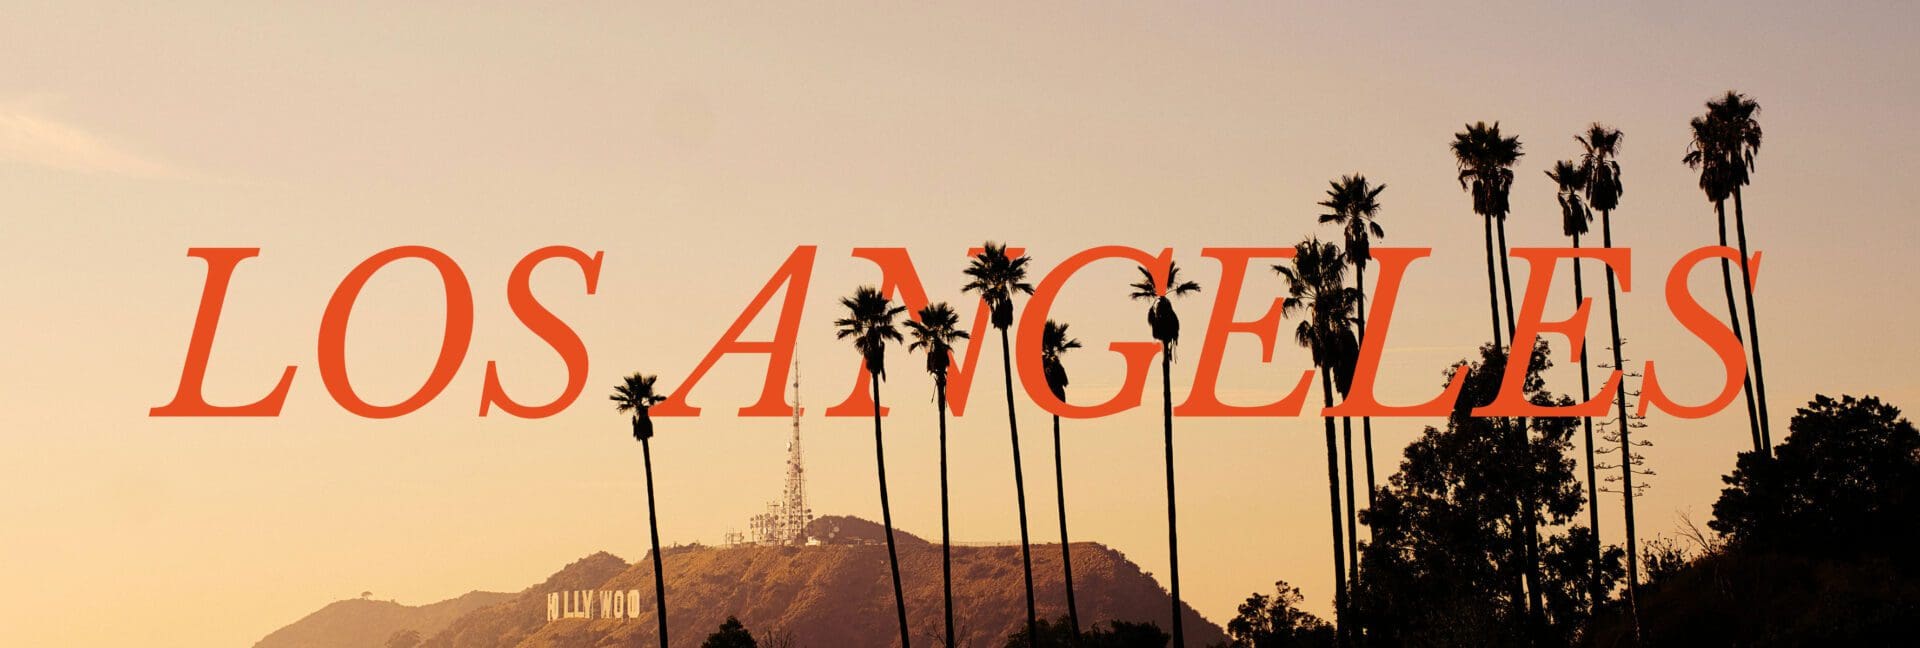 Los Angeles date night background banner